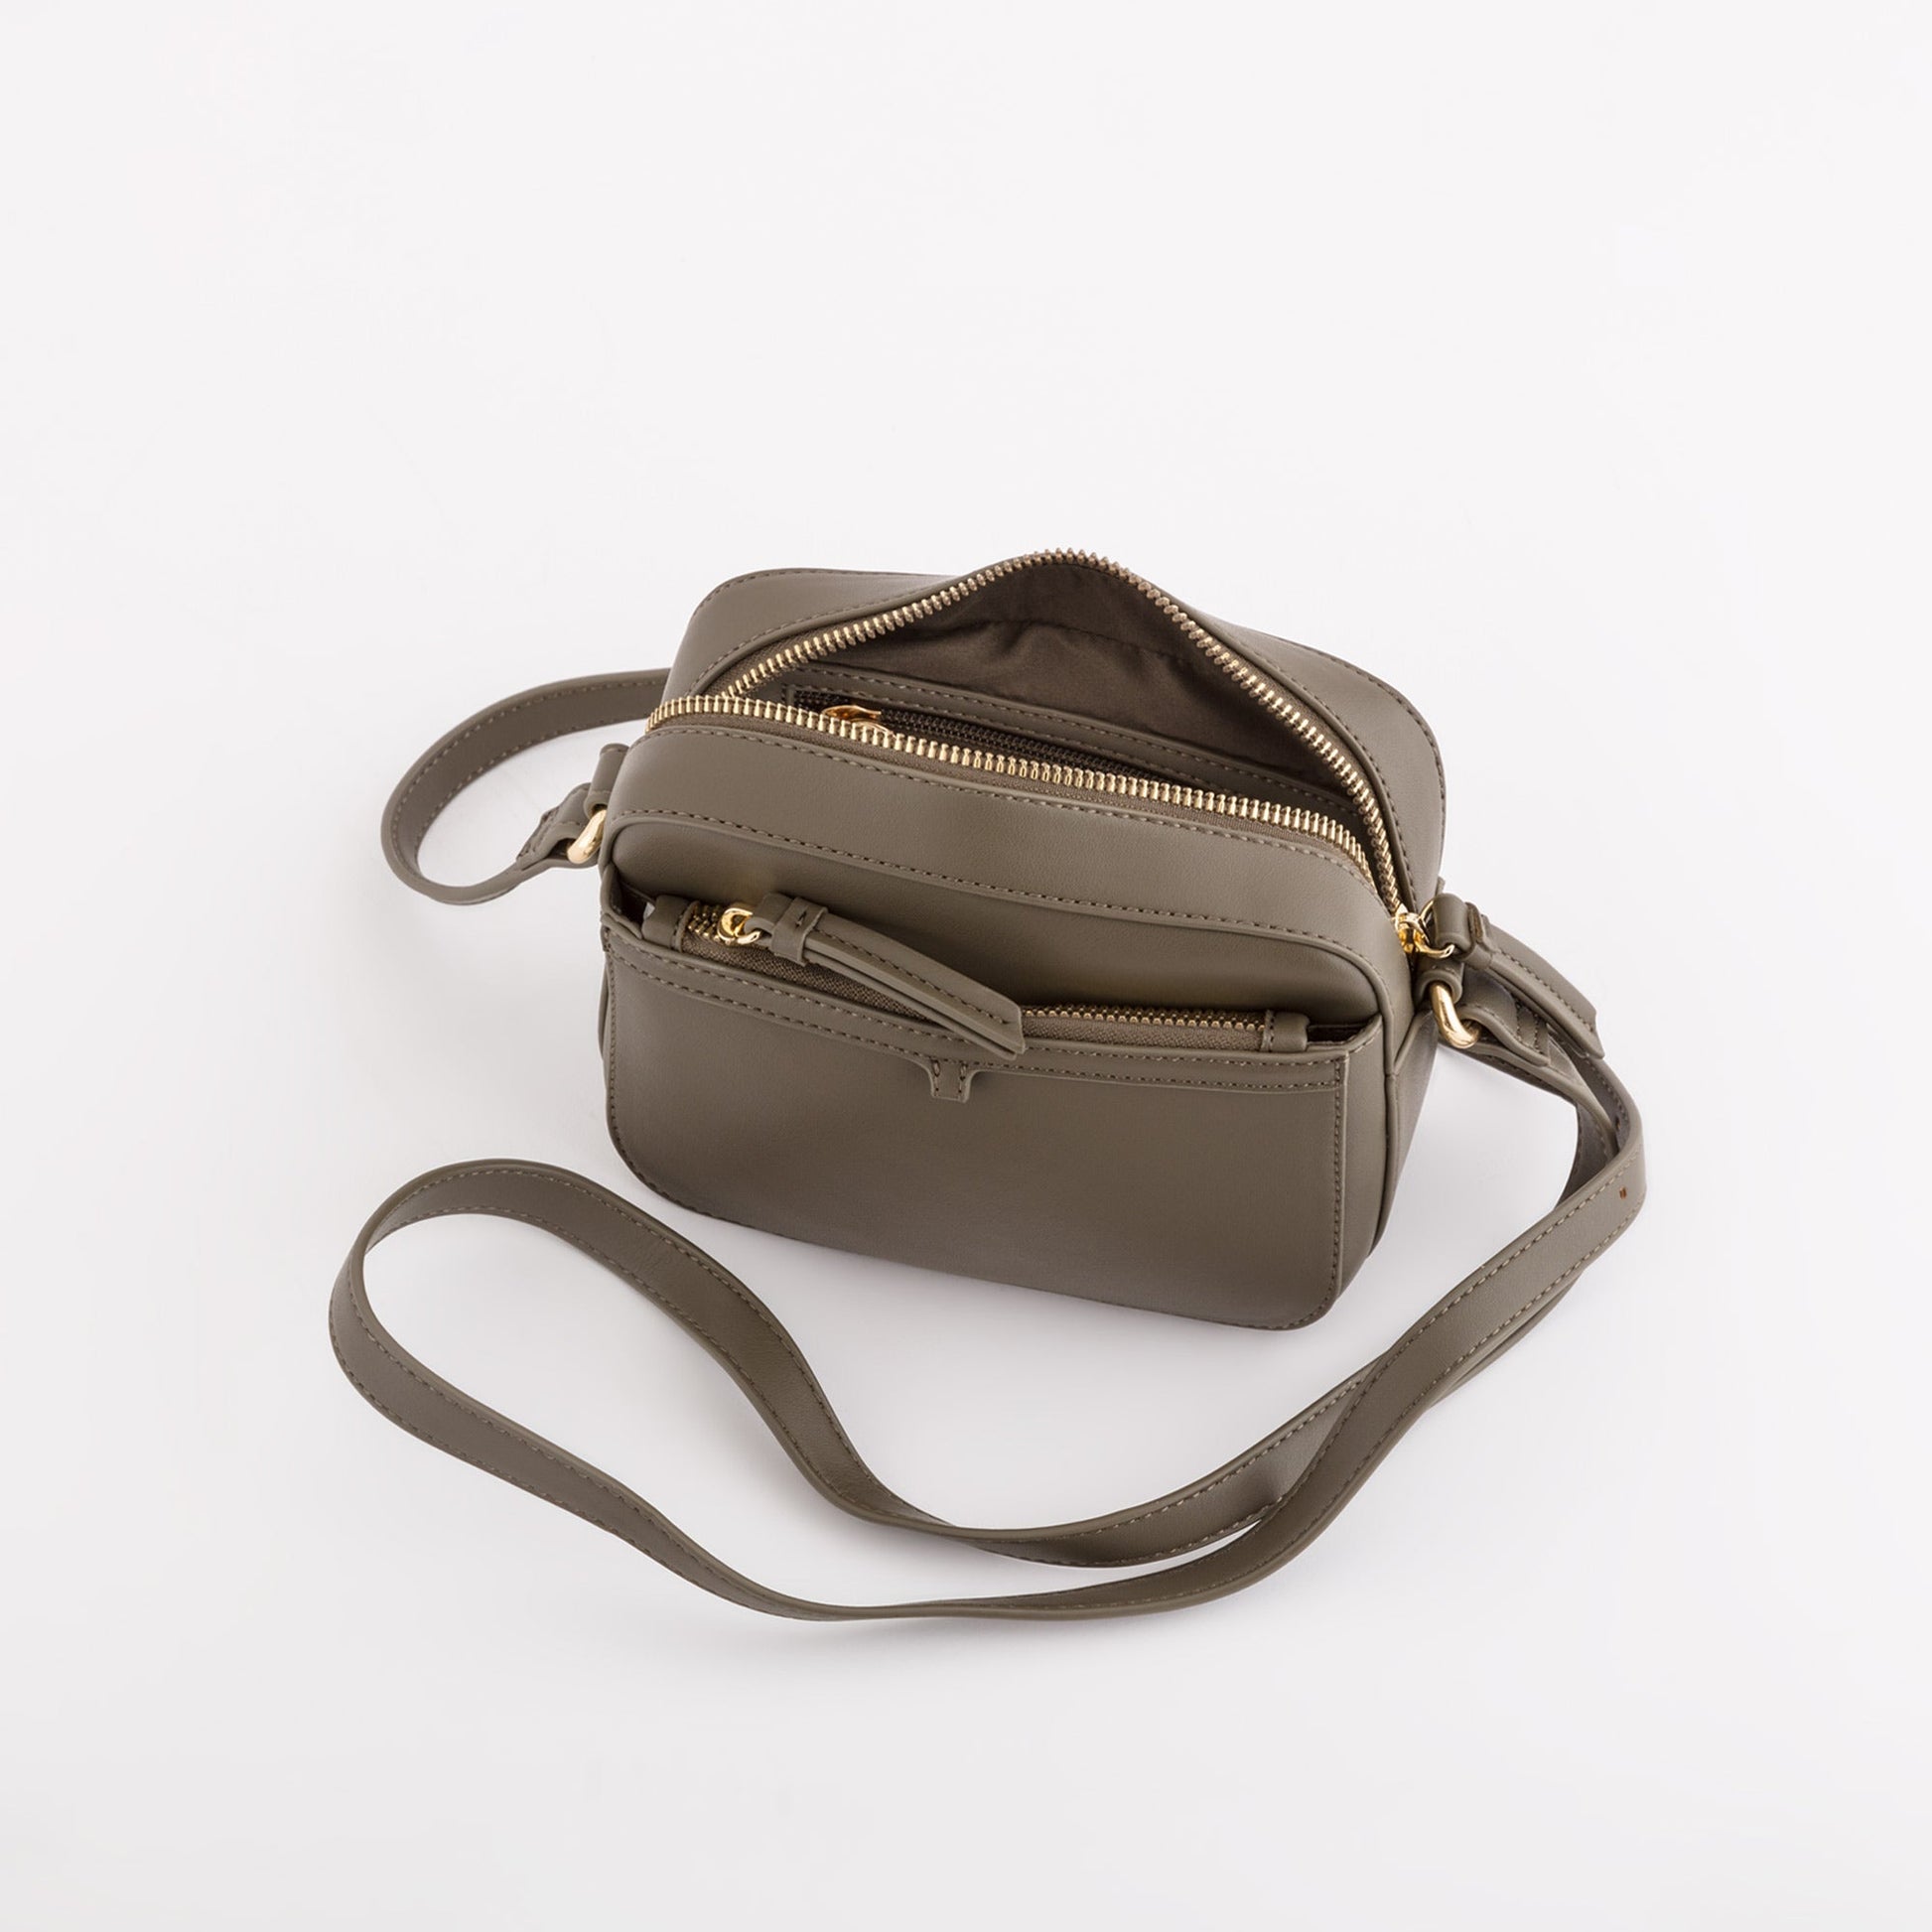 Lucy Winter Bags - Woman